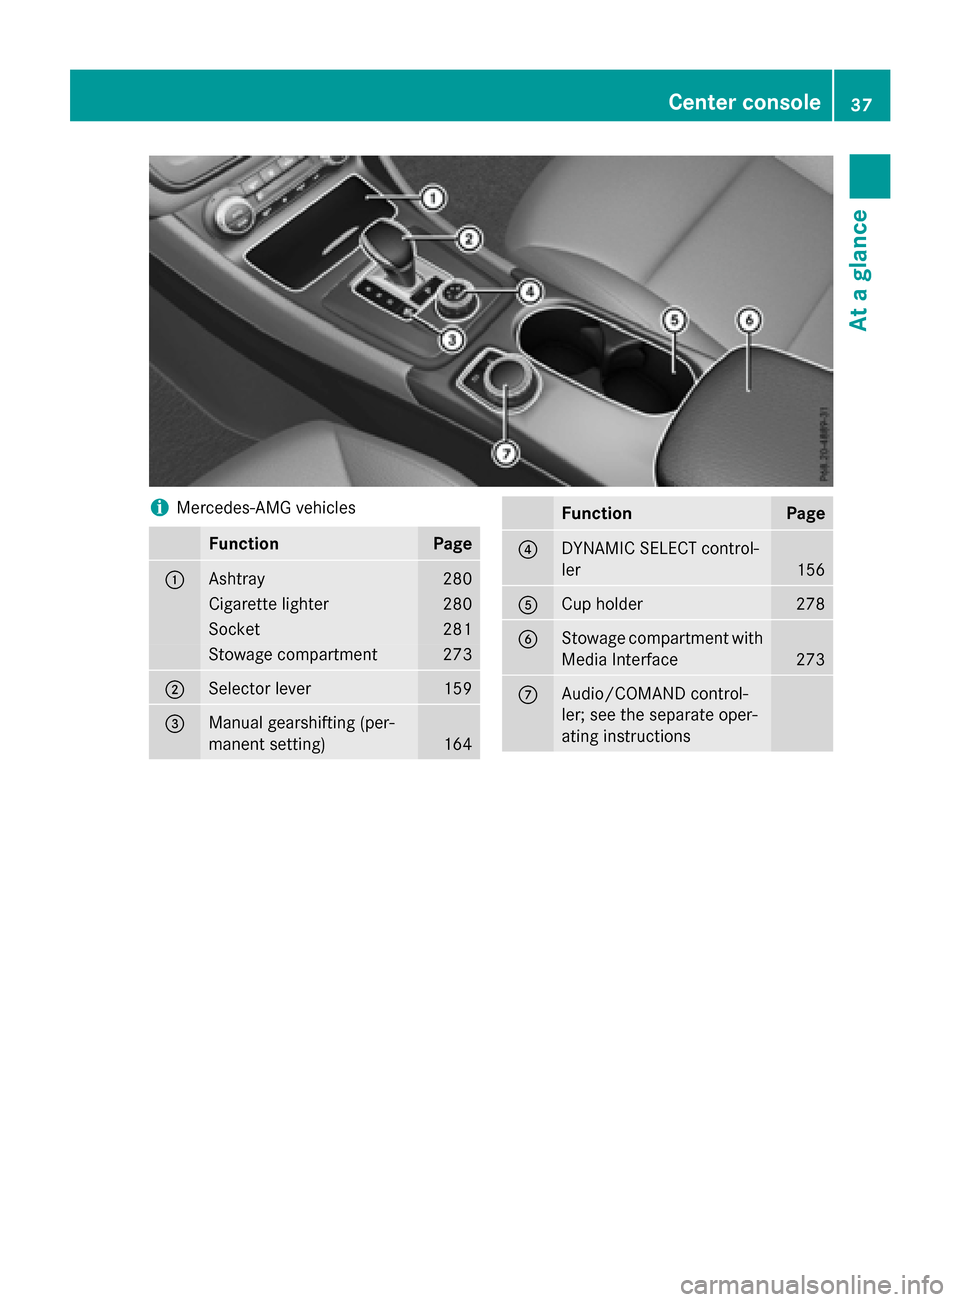 MERCEDES-BENZ CLA-Class 2016 C117 Owners Manual iMercedes-AMG vehicles
FunctionPage
:Ashtray280
Cigarette lighter280
Socket281
Stowage compartment273
;Selector lever159
=Manual gearshifting (per-
manent setting)
164
FunctionPage
?DYNAMIC SELECT con